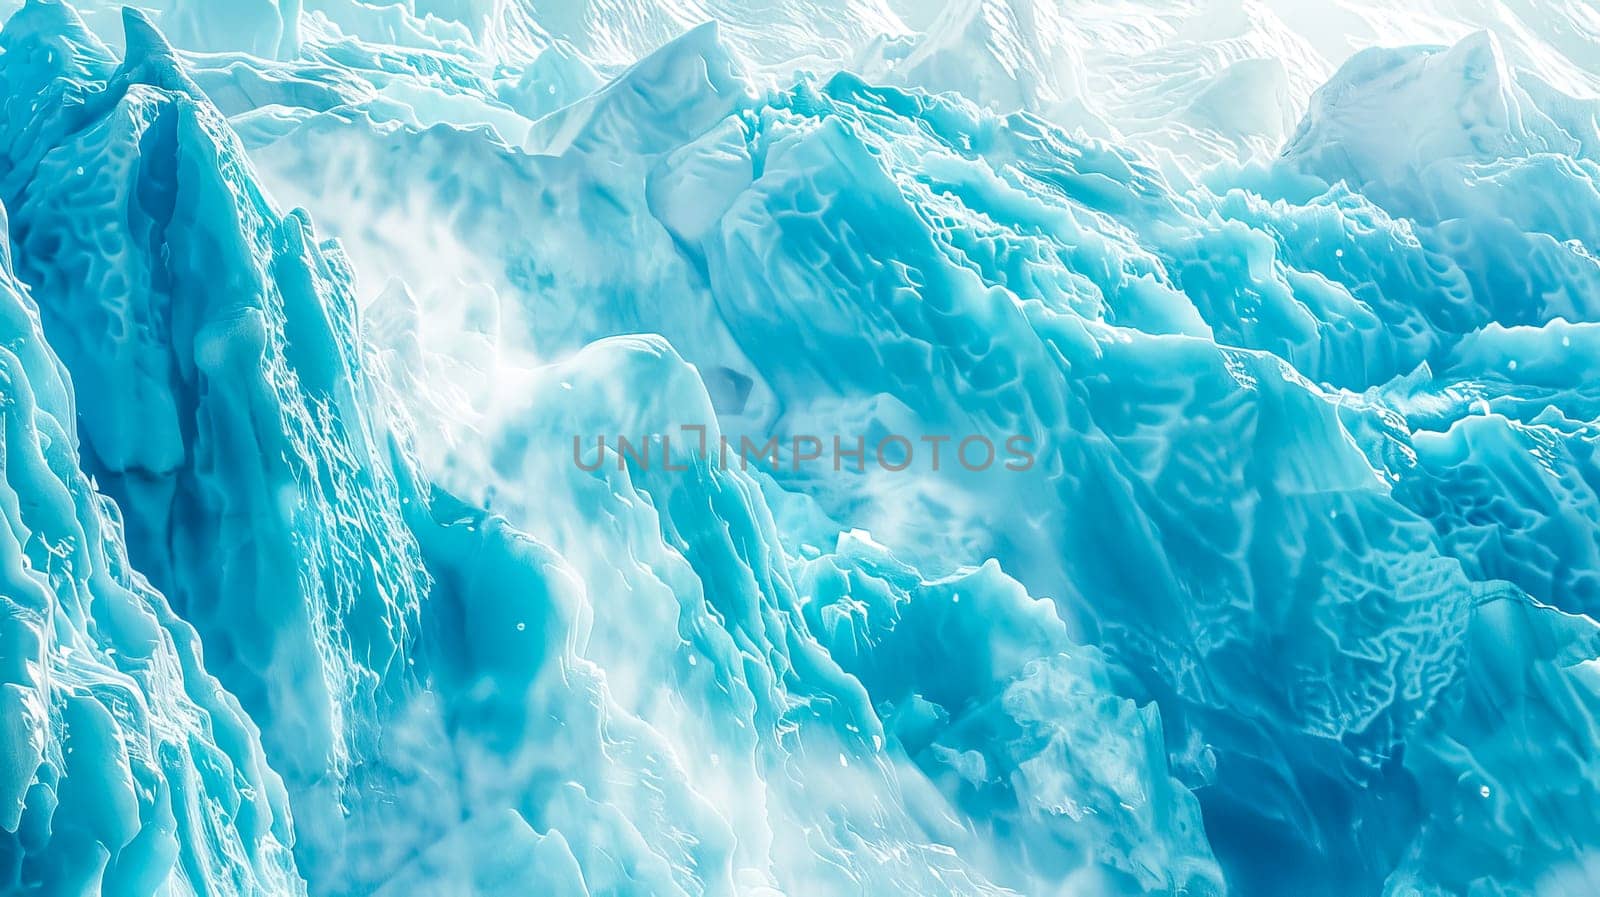 High-definition capture of a vivid blue glacier with intricate icy details by Edophoto